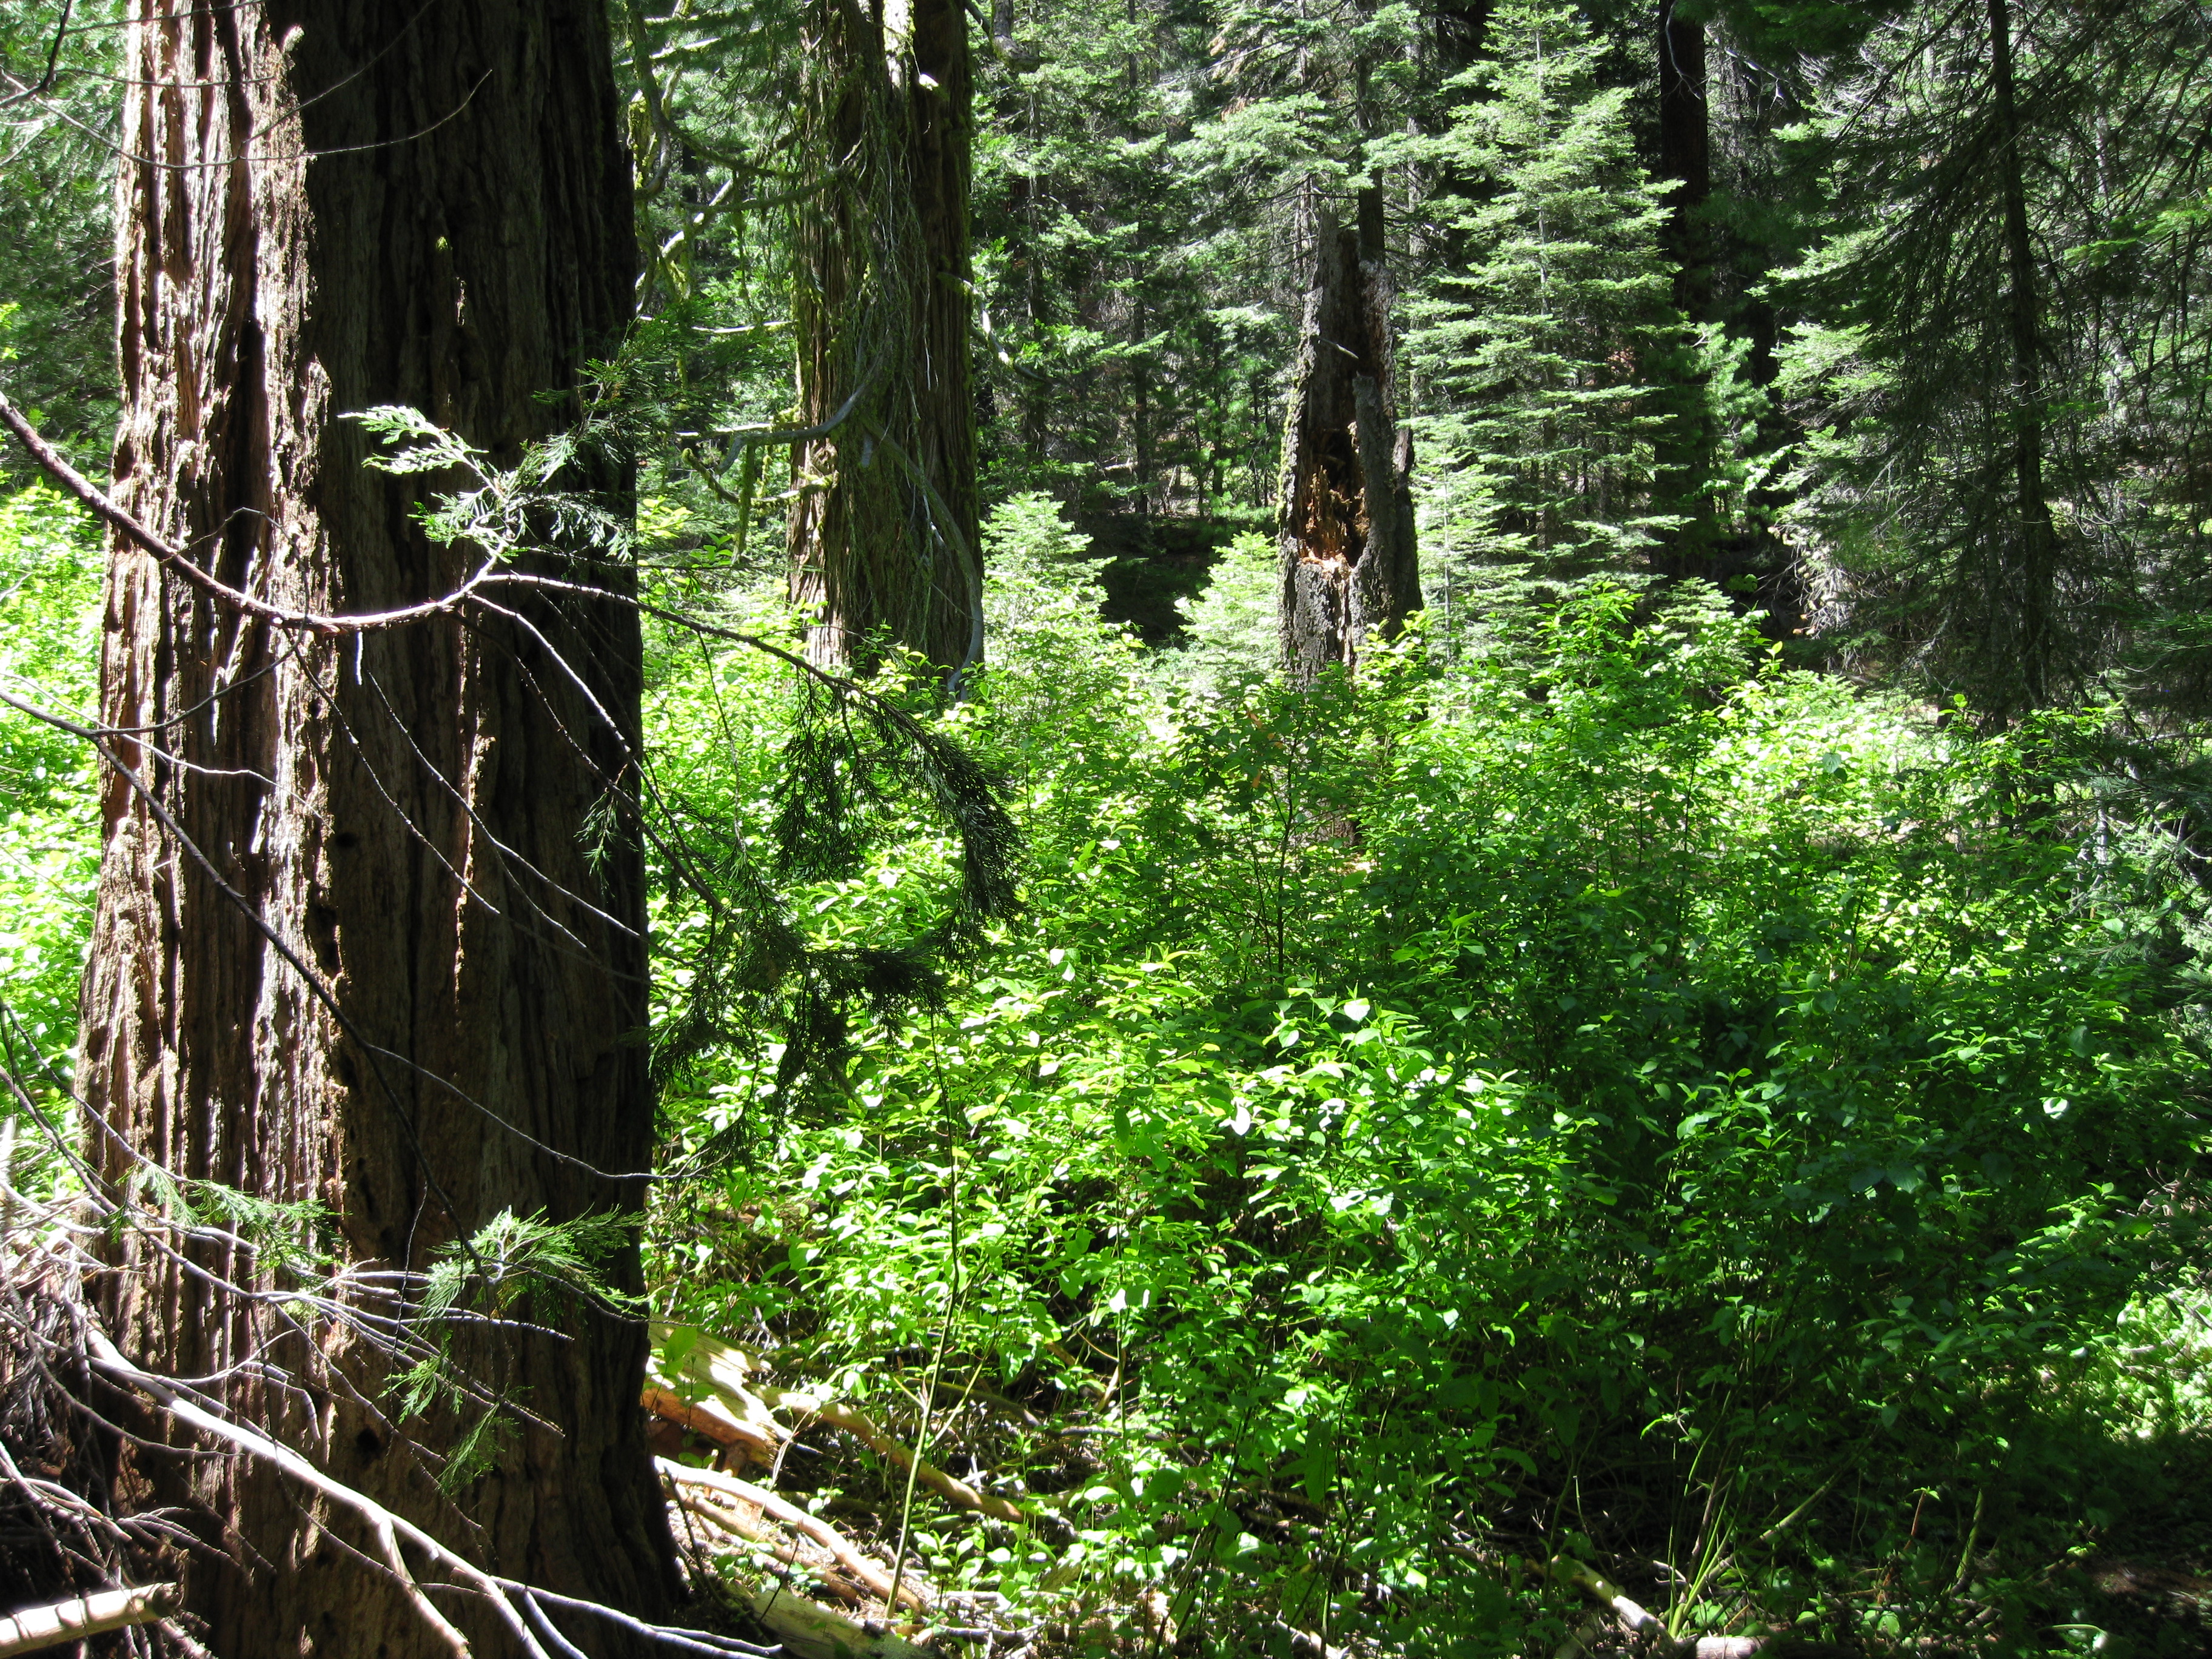 Handful of heavyweight trees per acre are forest champs | UW News